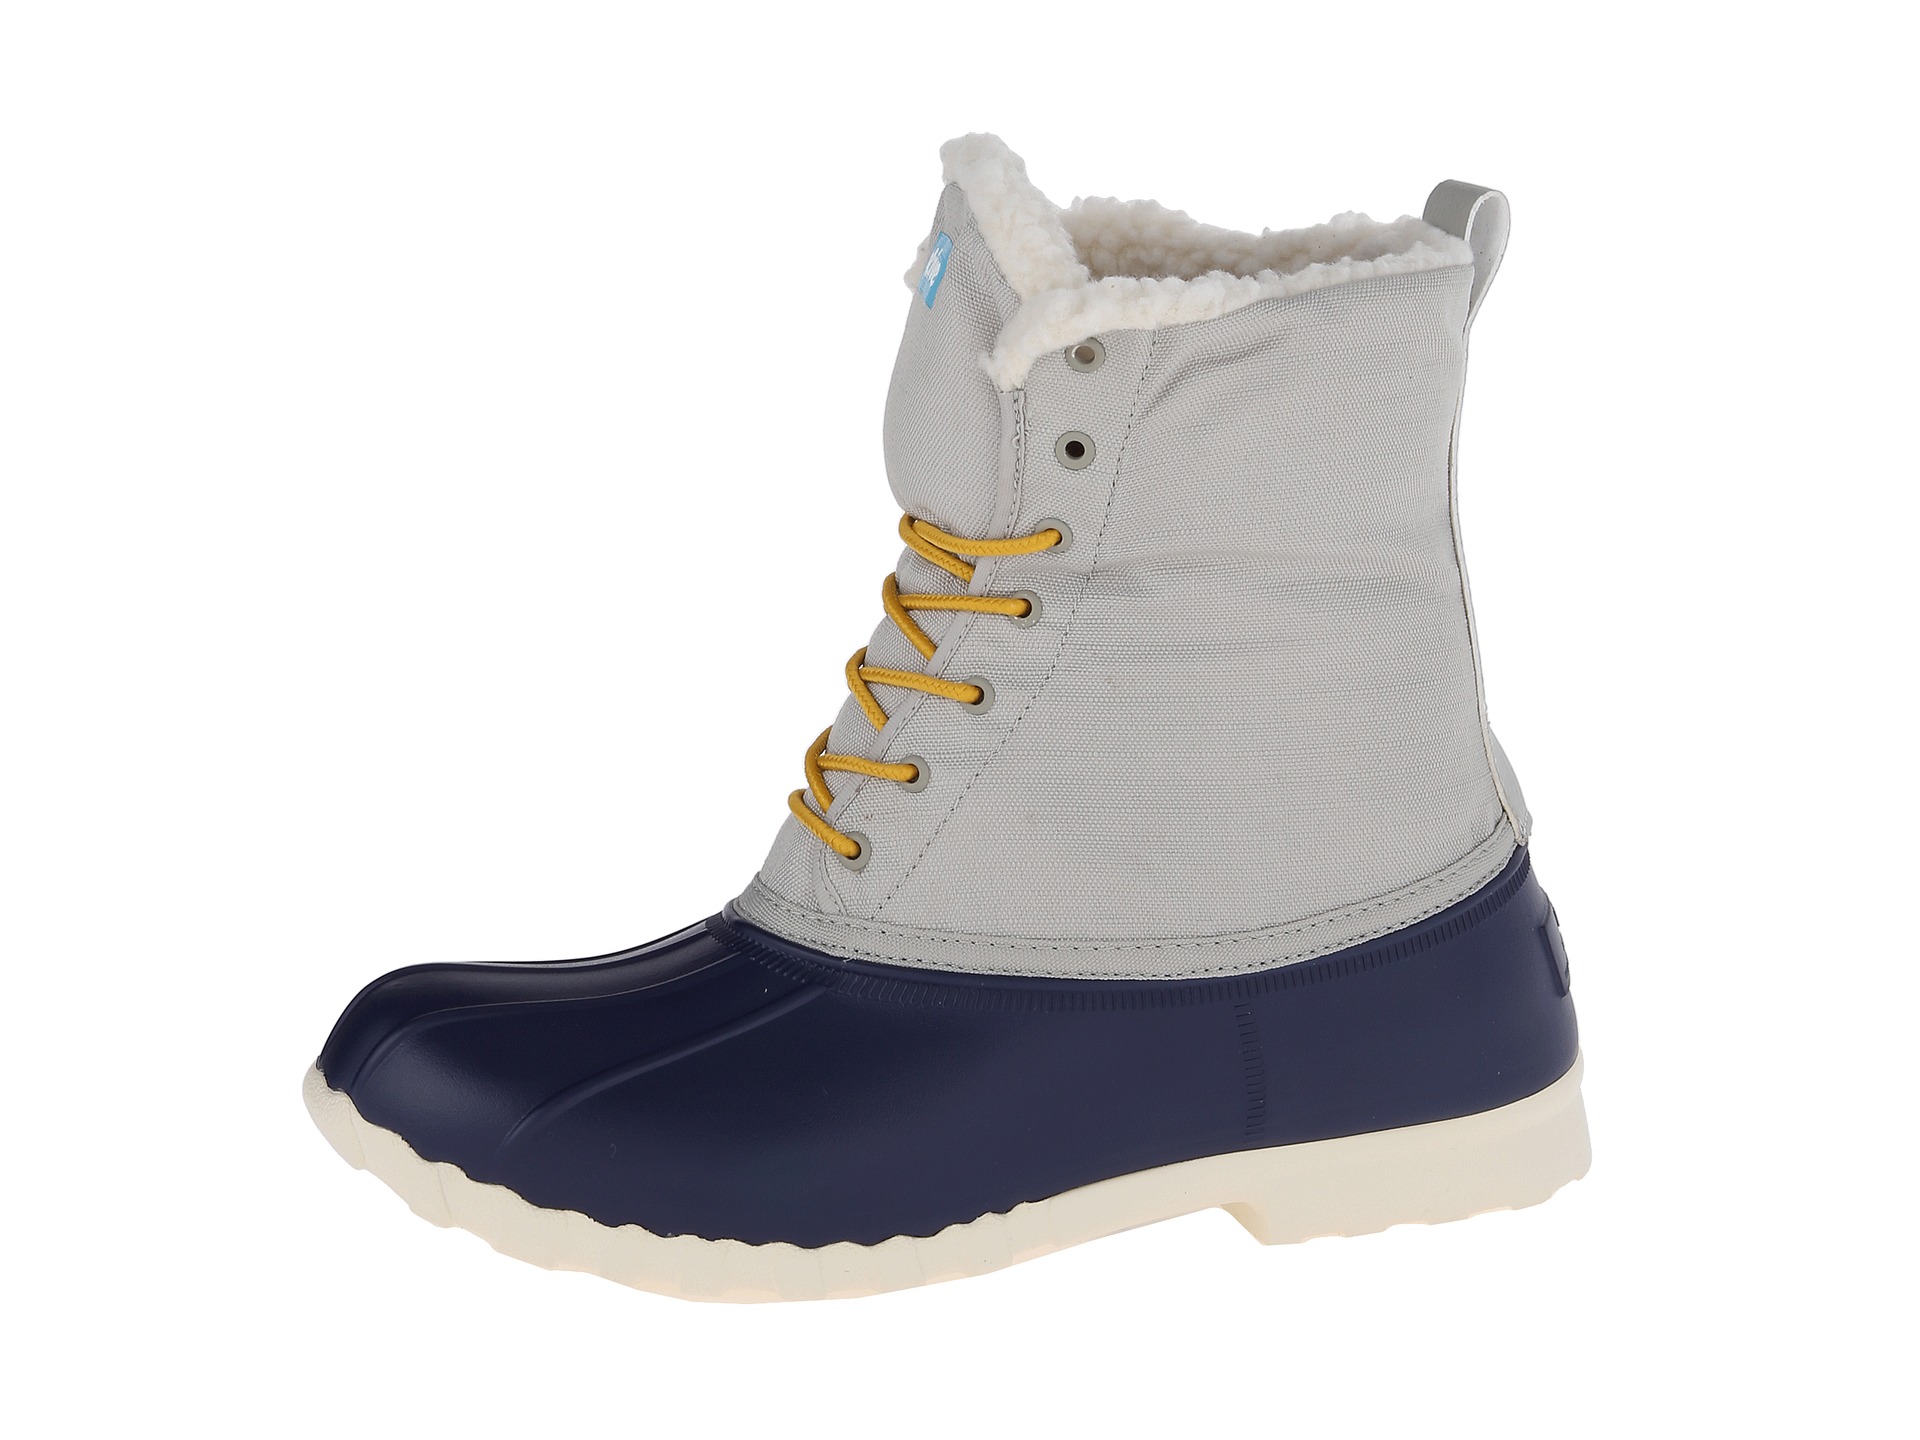 Native Shoes Jimmy Winter - Zappos Free Shipping BOTH Ways